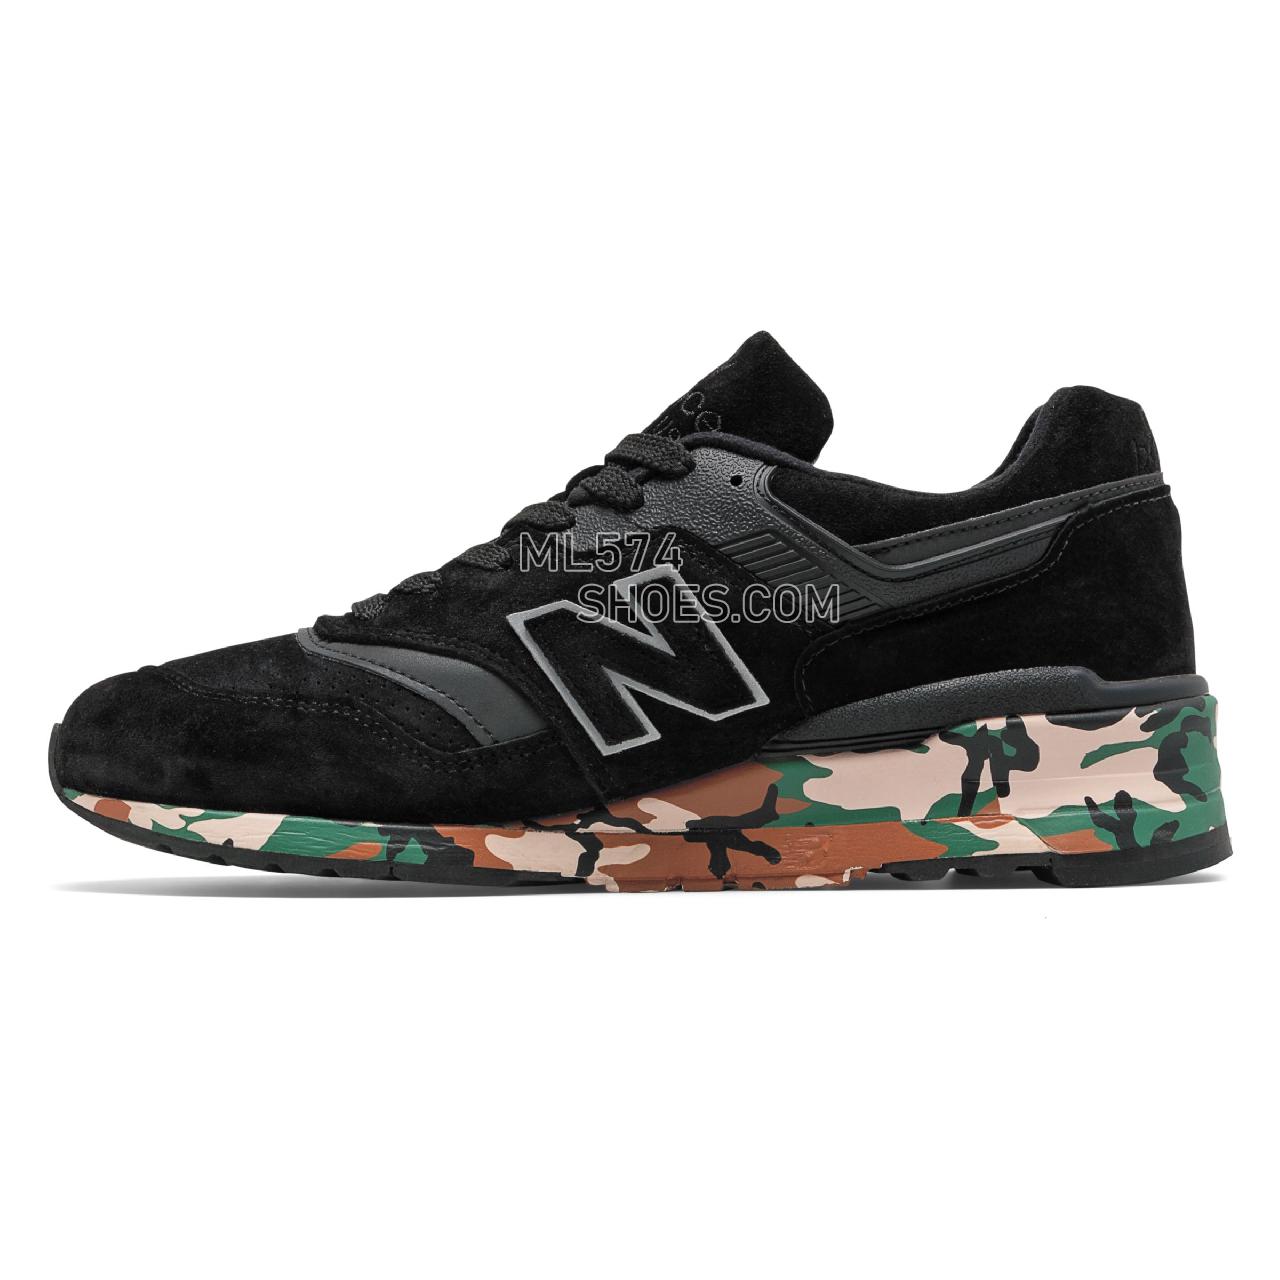 New Balance Made in US 997 - Men's Made in US 997 - Black with Silver - M997CMO